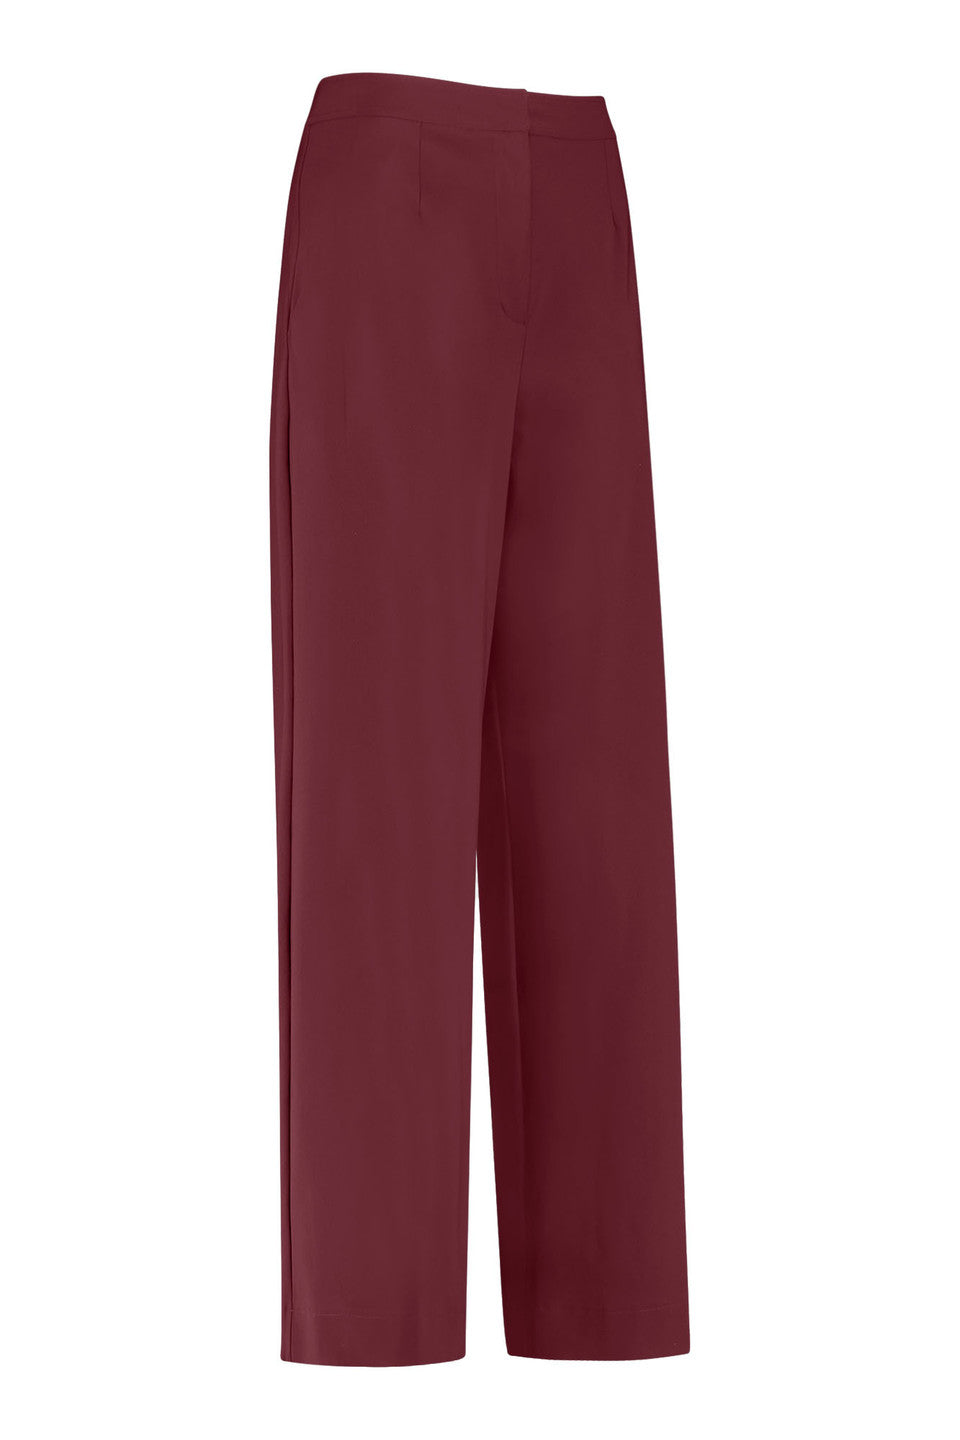 Studio Anneloes Holly bonded trousers